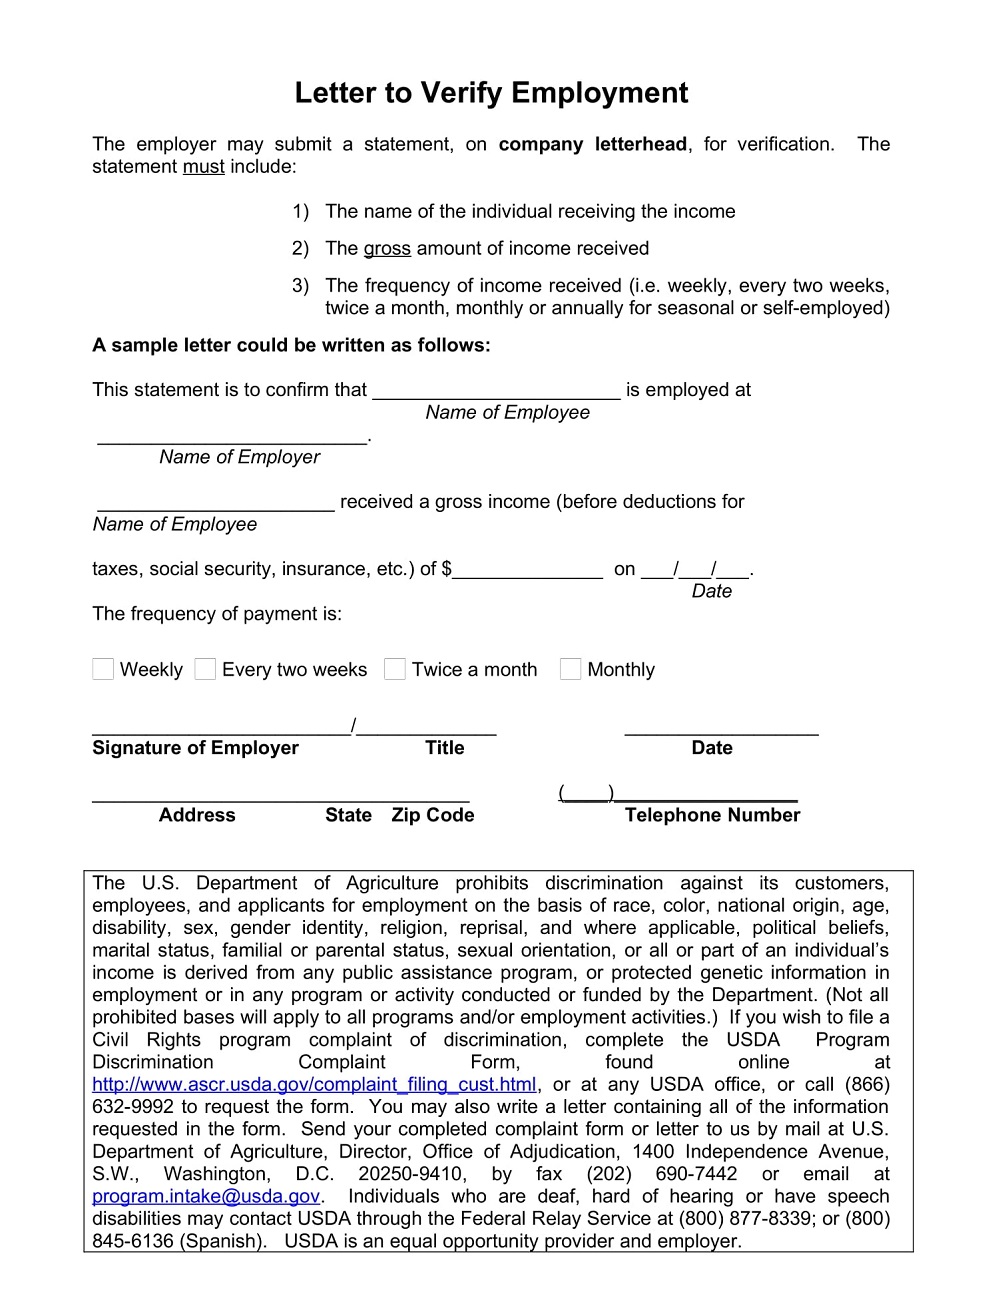 Letter to Verify Employment Template